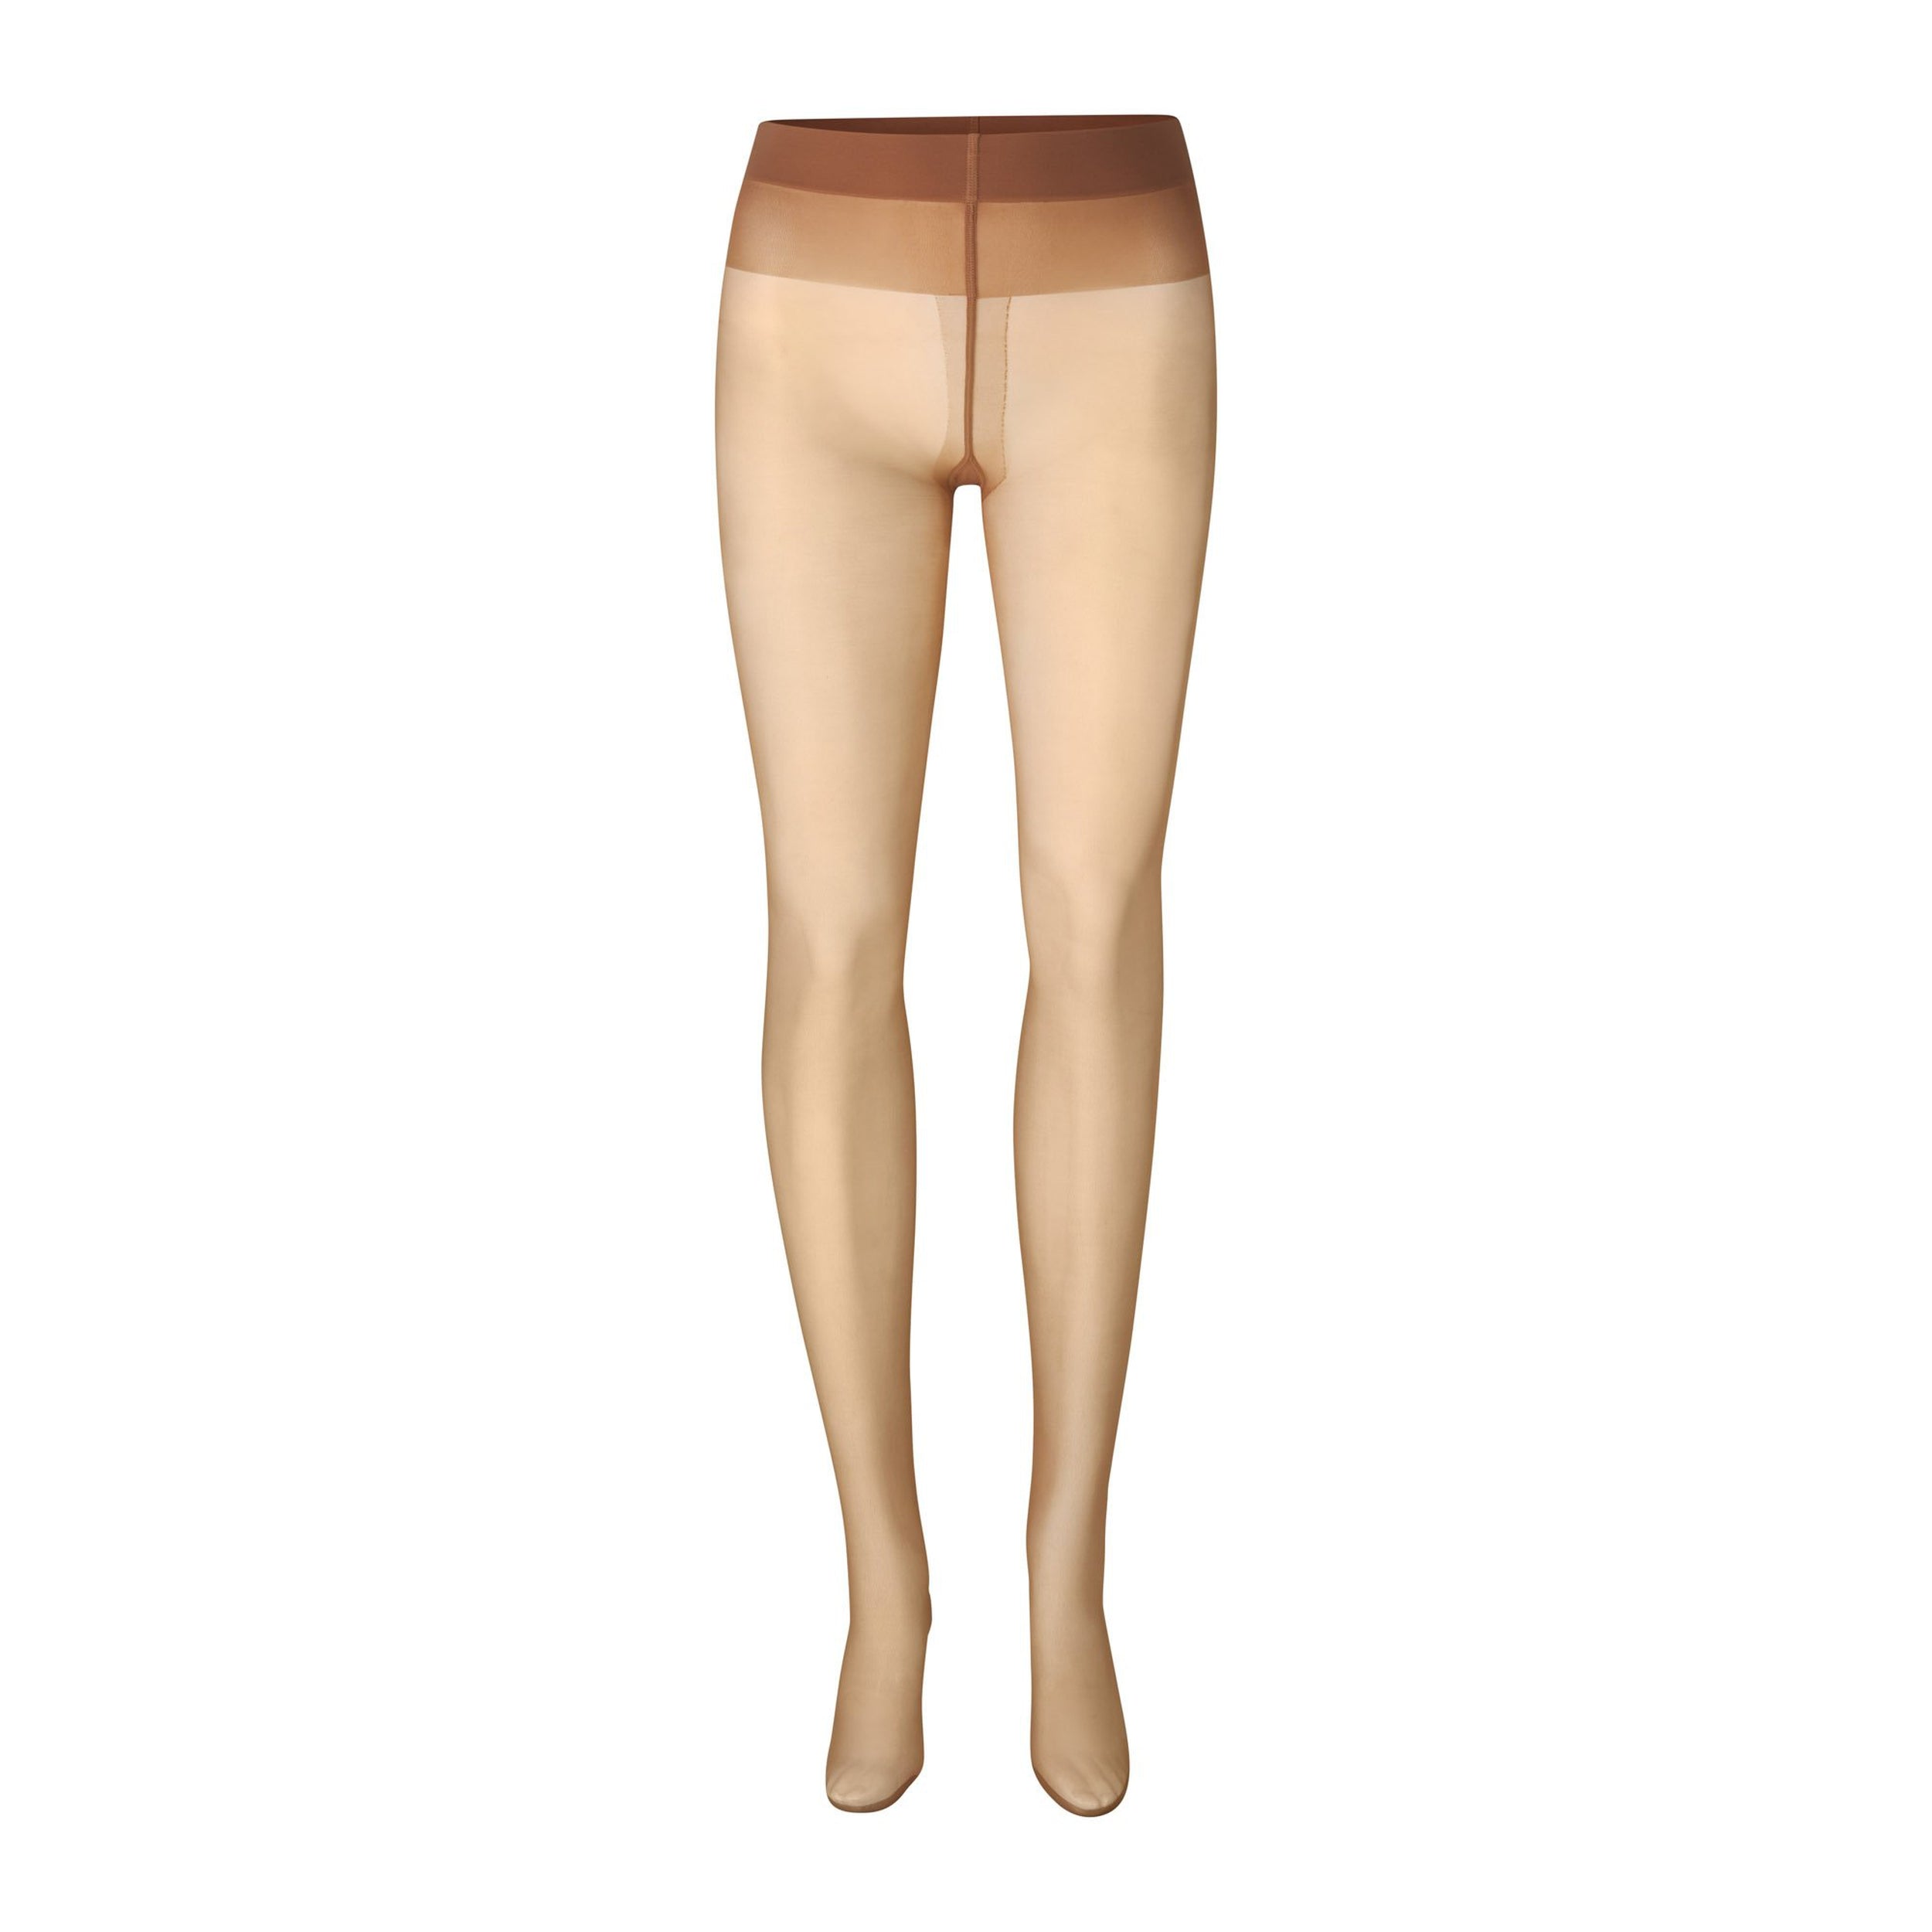 NUDE SUPPORT TIGHTS | SIENNA